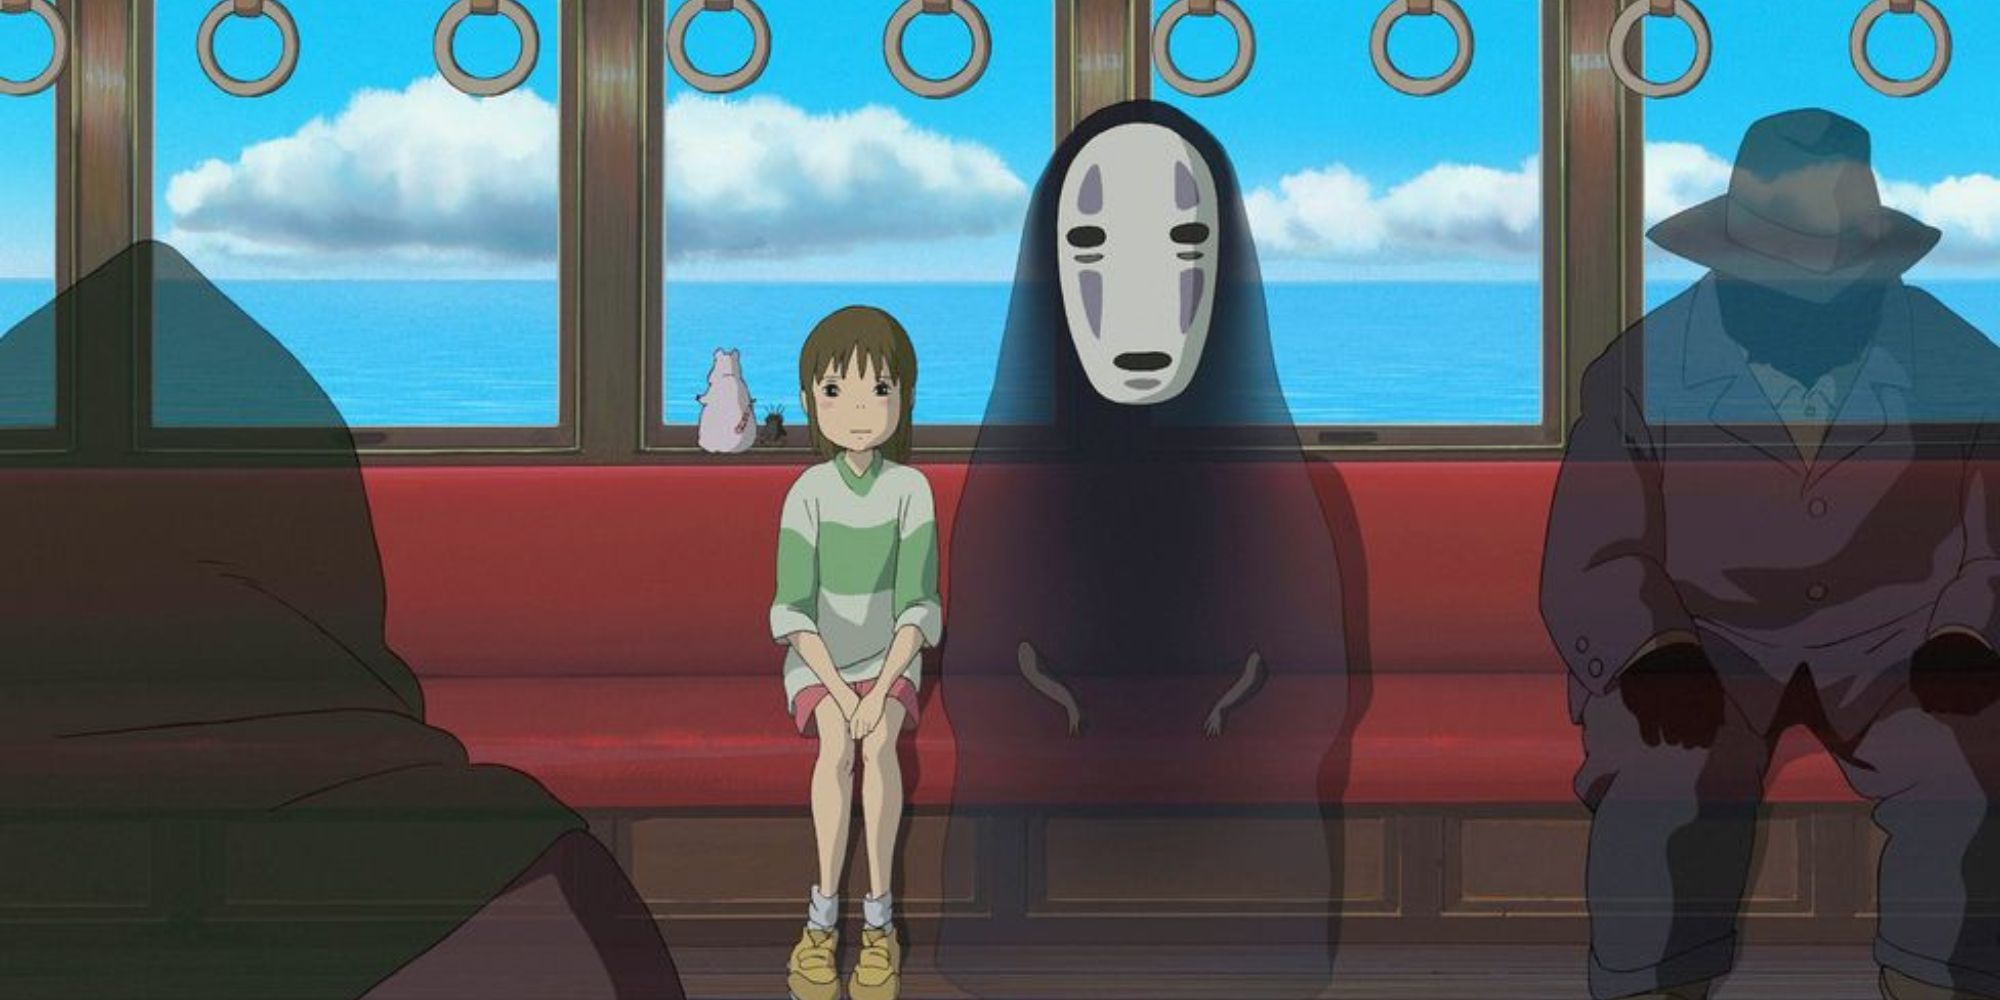 Chihiro and No Face in Spirited Away